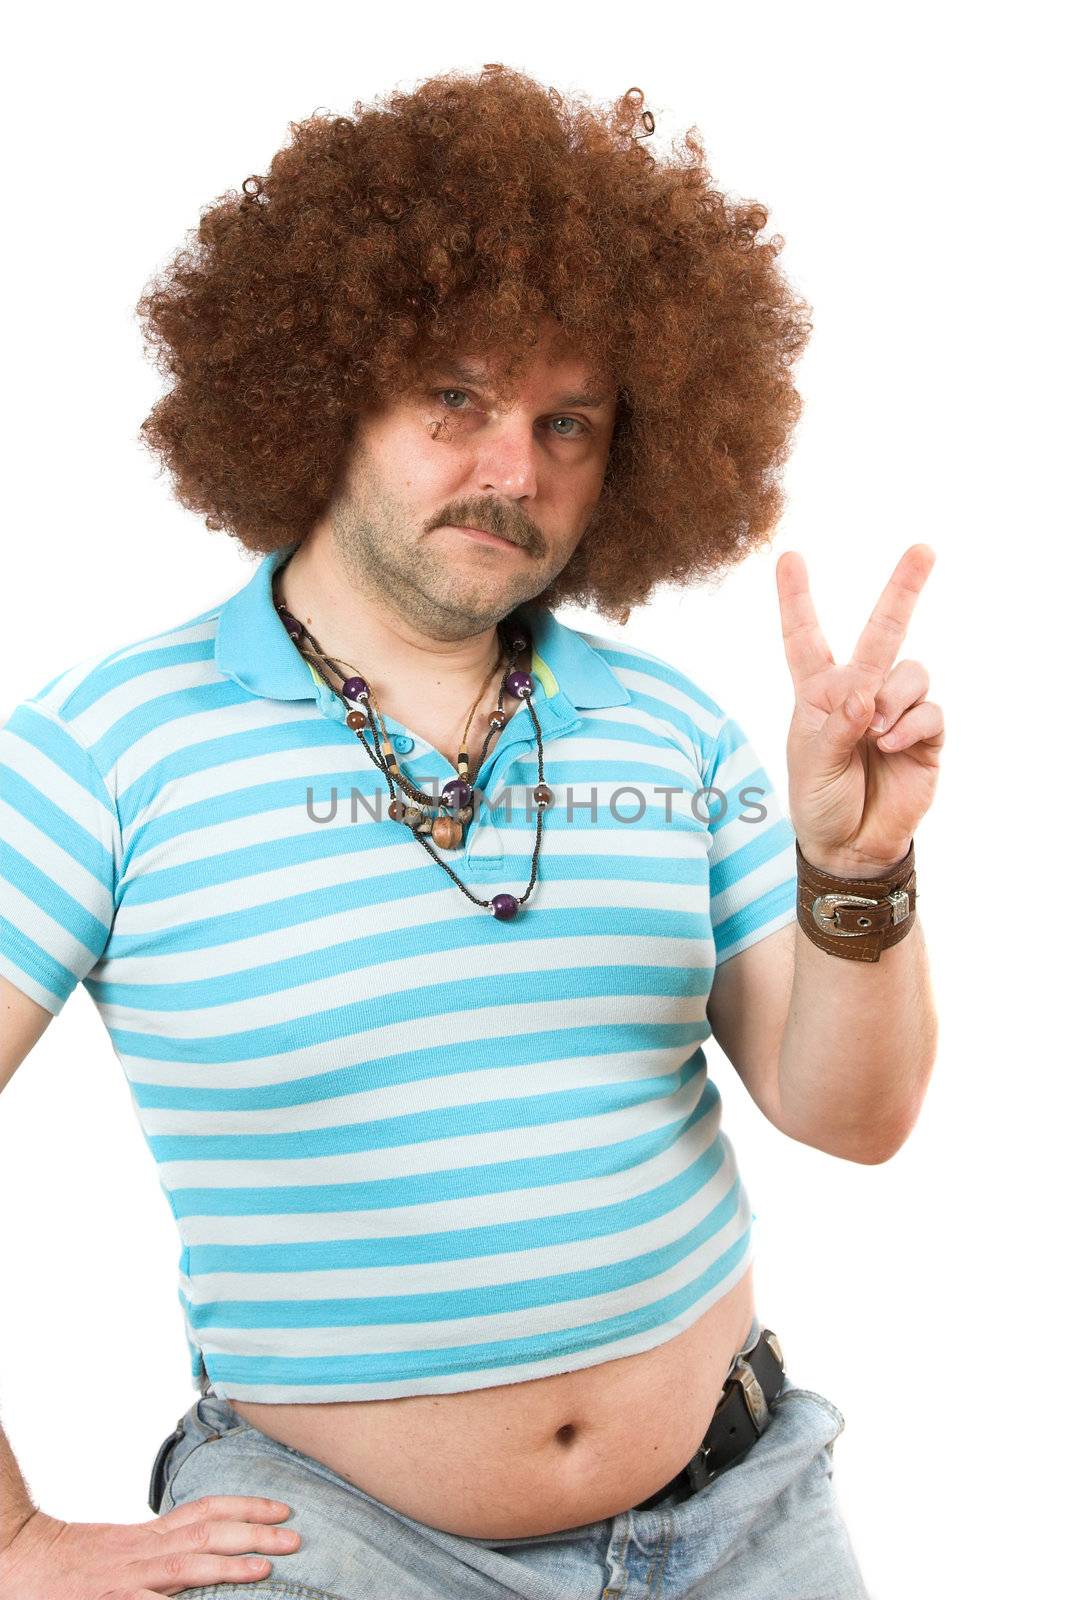 Old hippie with beerbelly hanging over his jeans making the peace sign